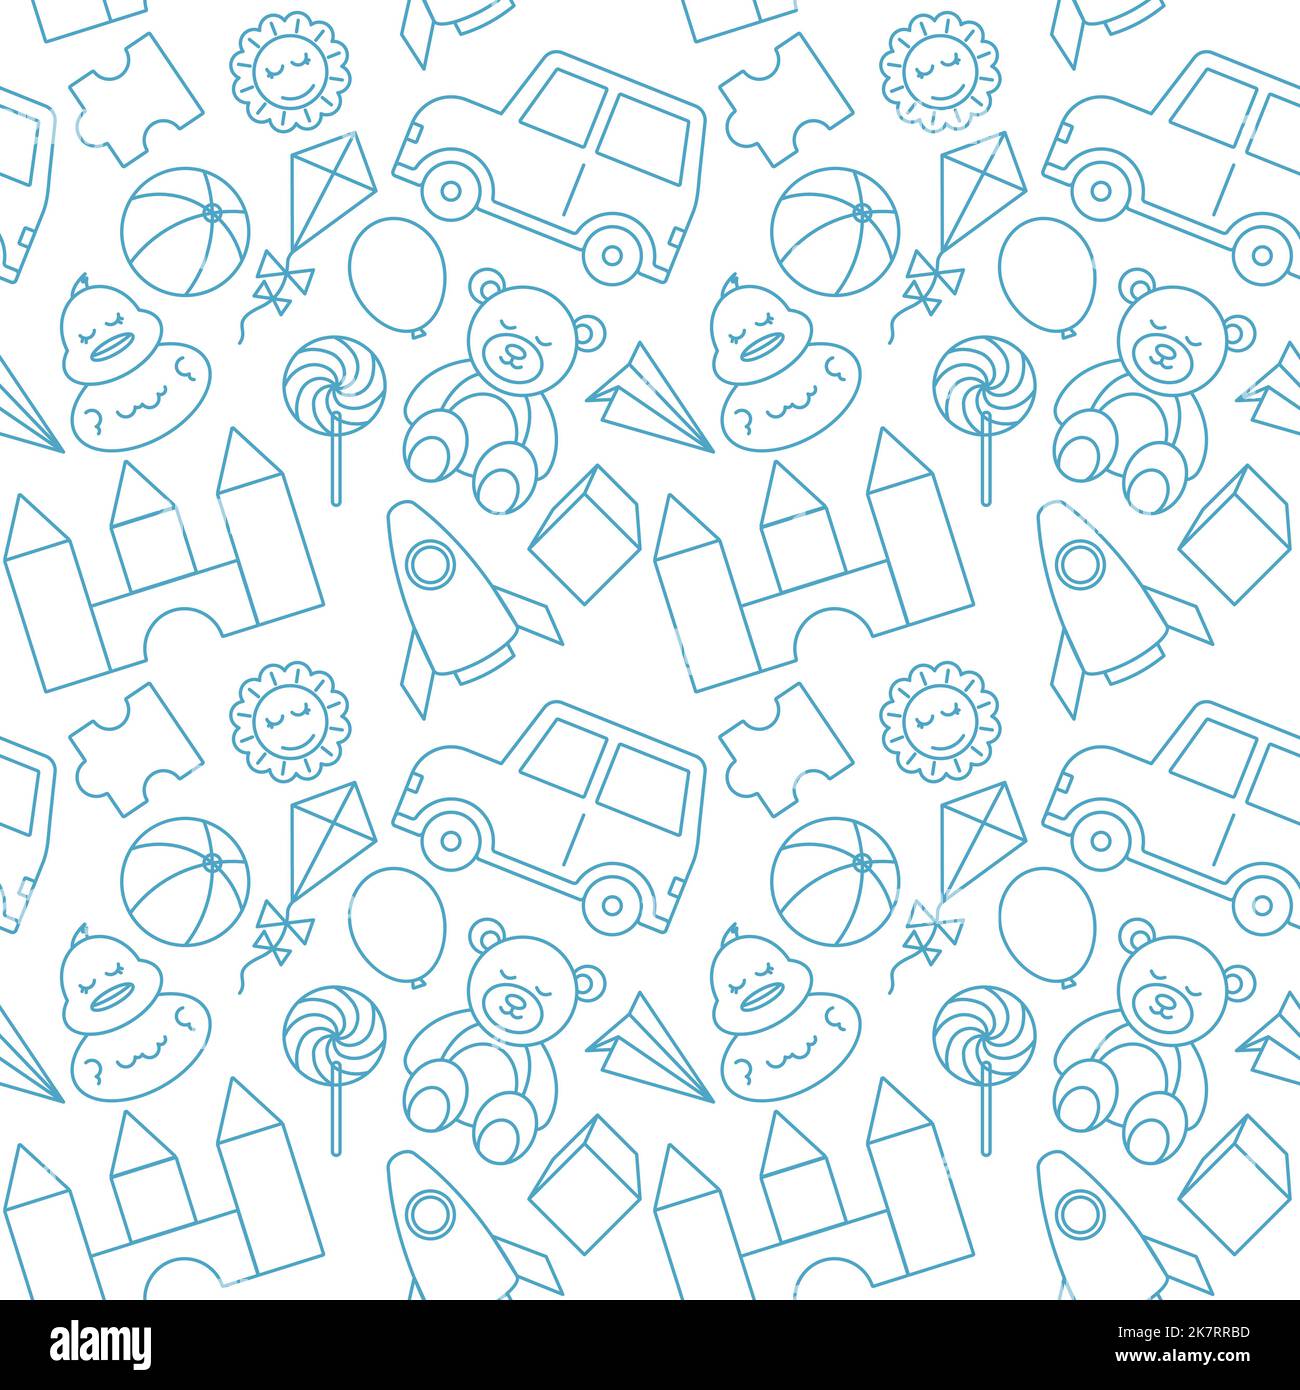 Toy Children Kid Seamless Pattern Outline Background Stock Vector